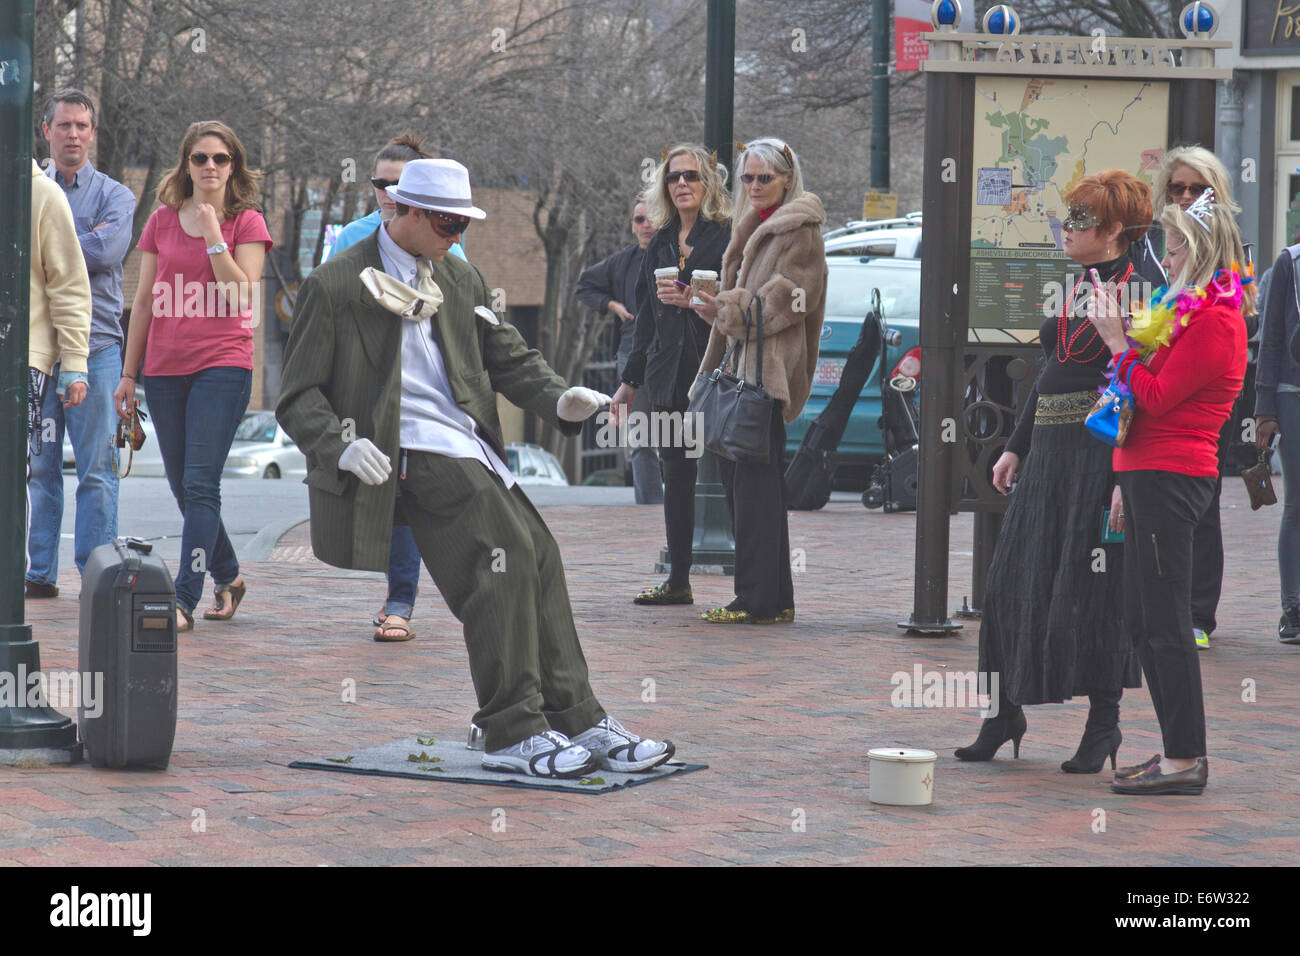 Asheville, North Carolina, USA - March 2, 2014: Living statue street artist showing a man in a suit being blown backward Stock Photo